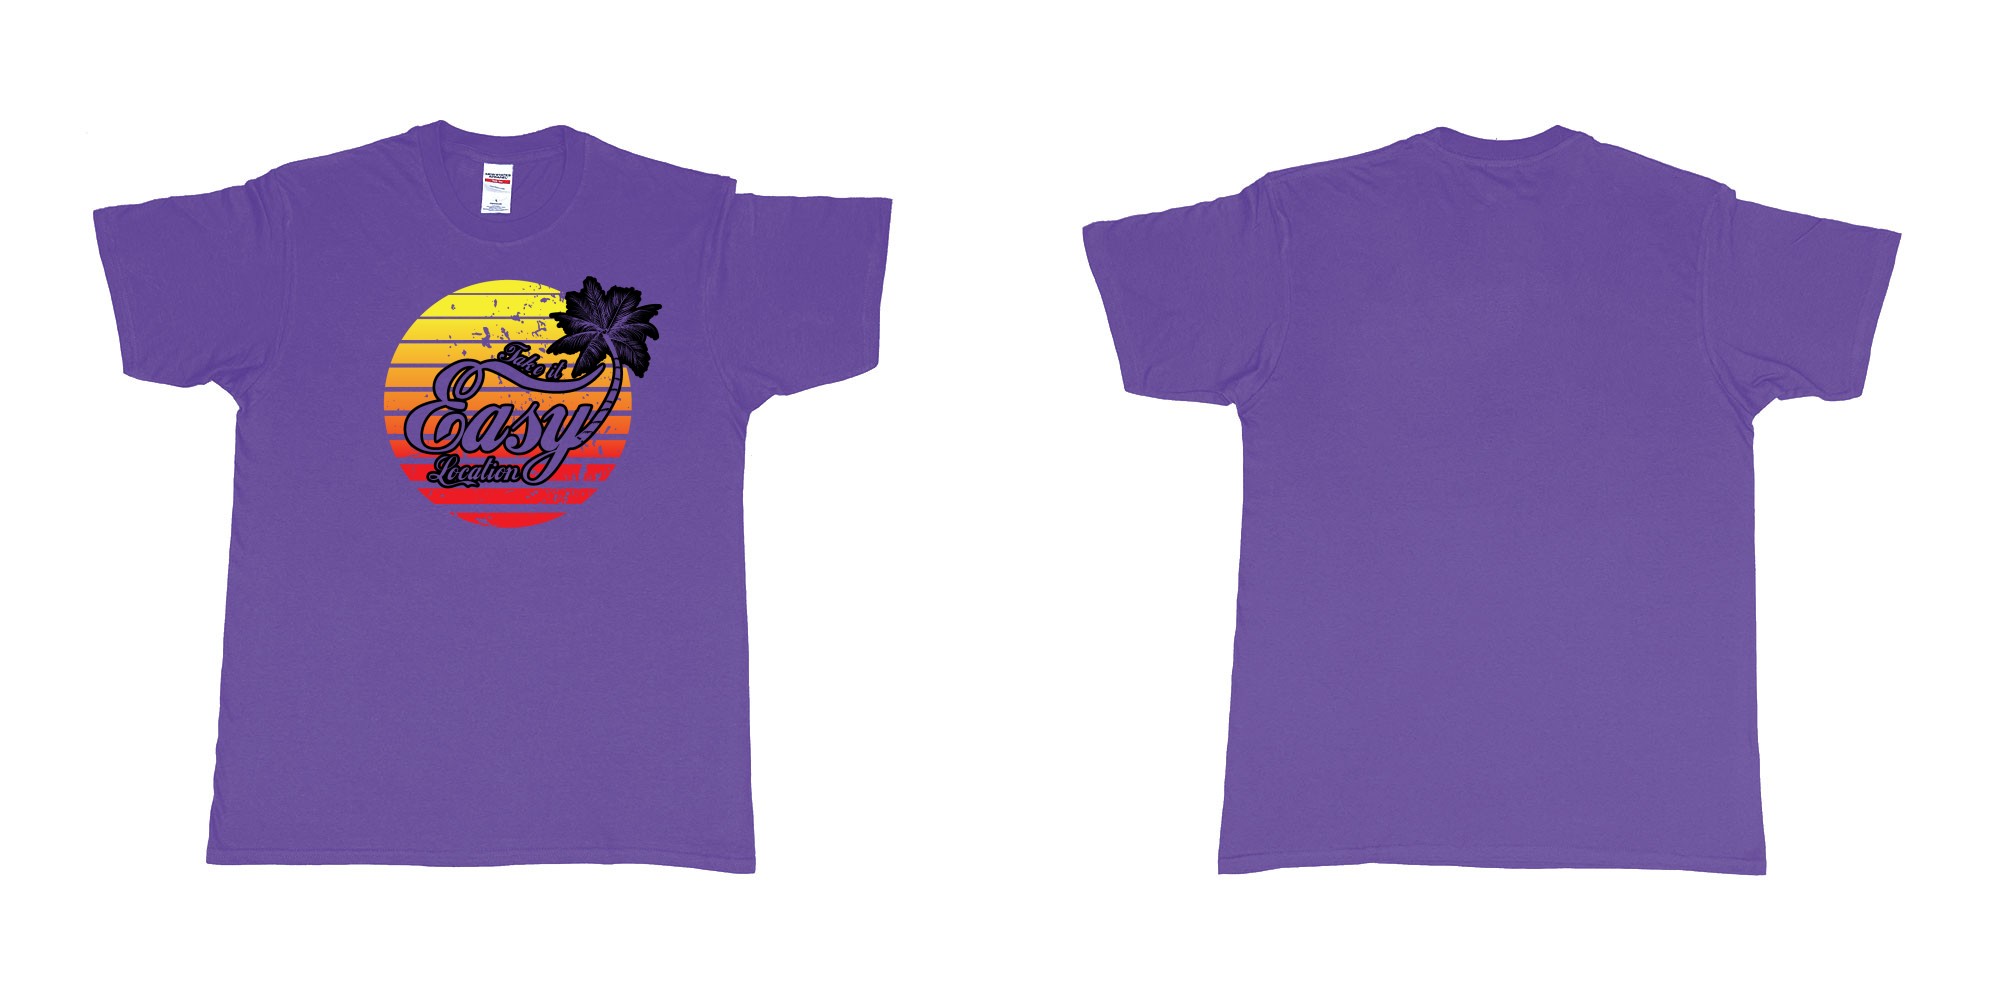 Custom tshirt design take is easy own location easy tee bali custom text printing in fabric color purple choice your own text made in Bali by The Pirate Way